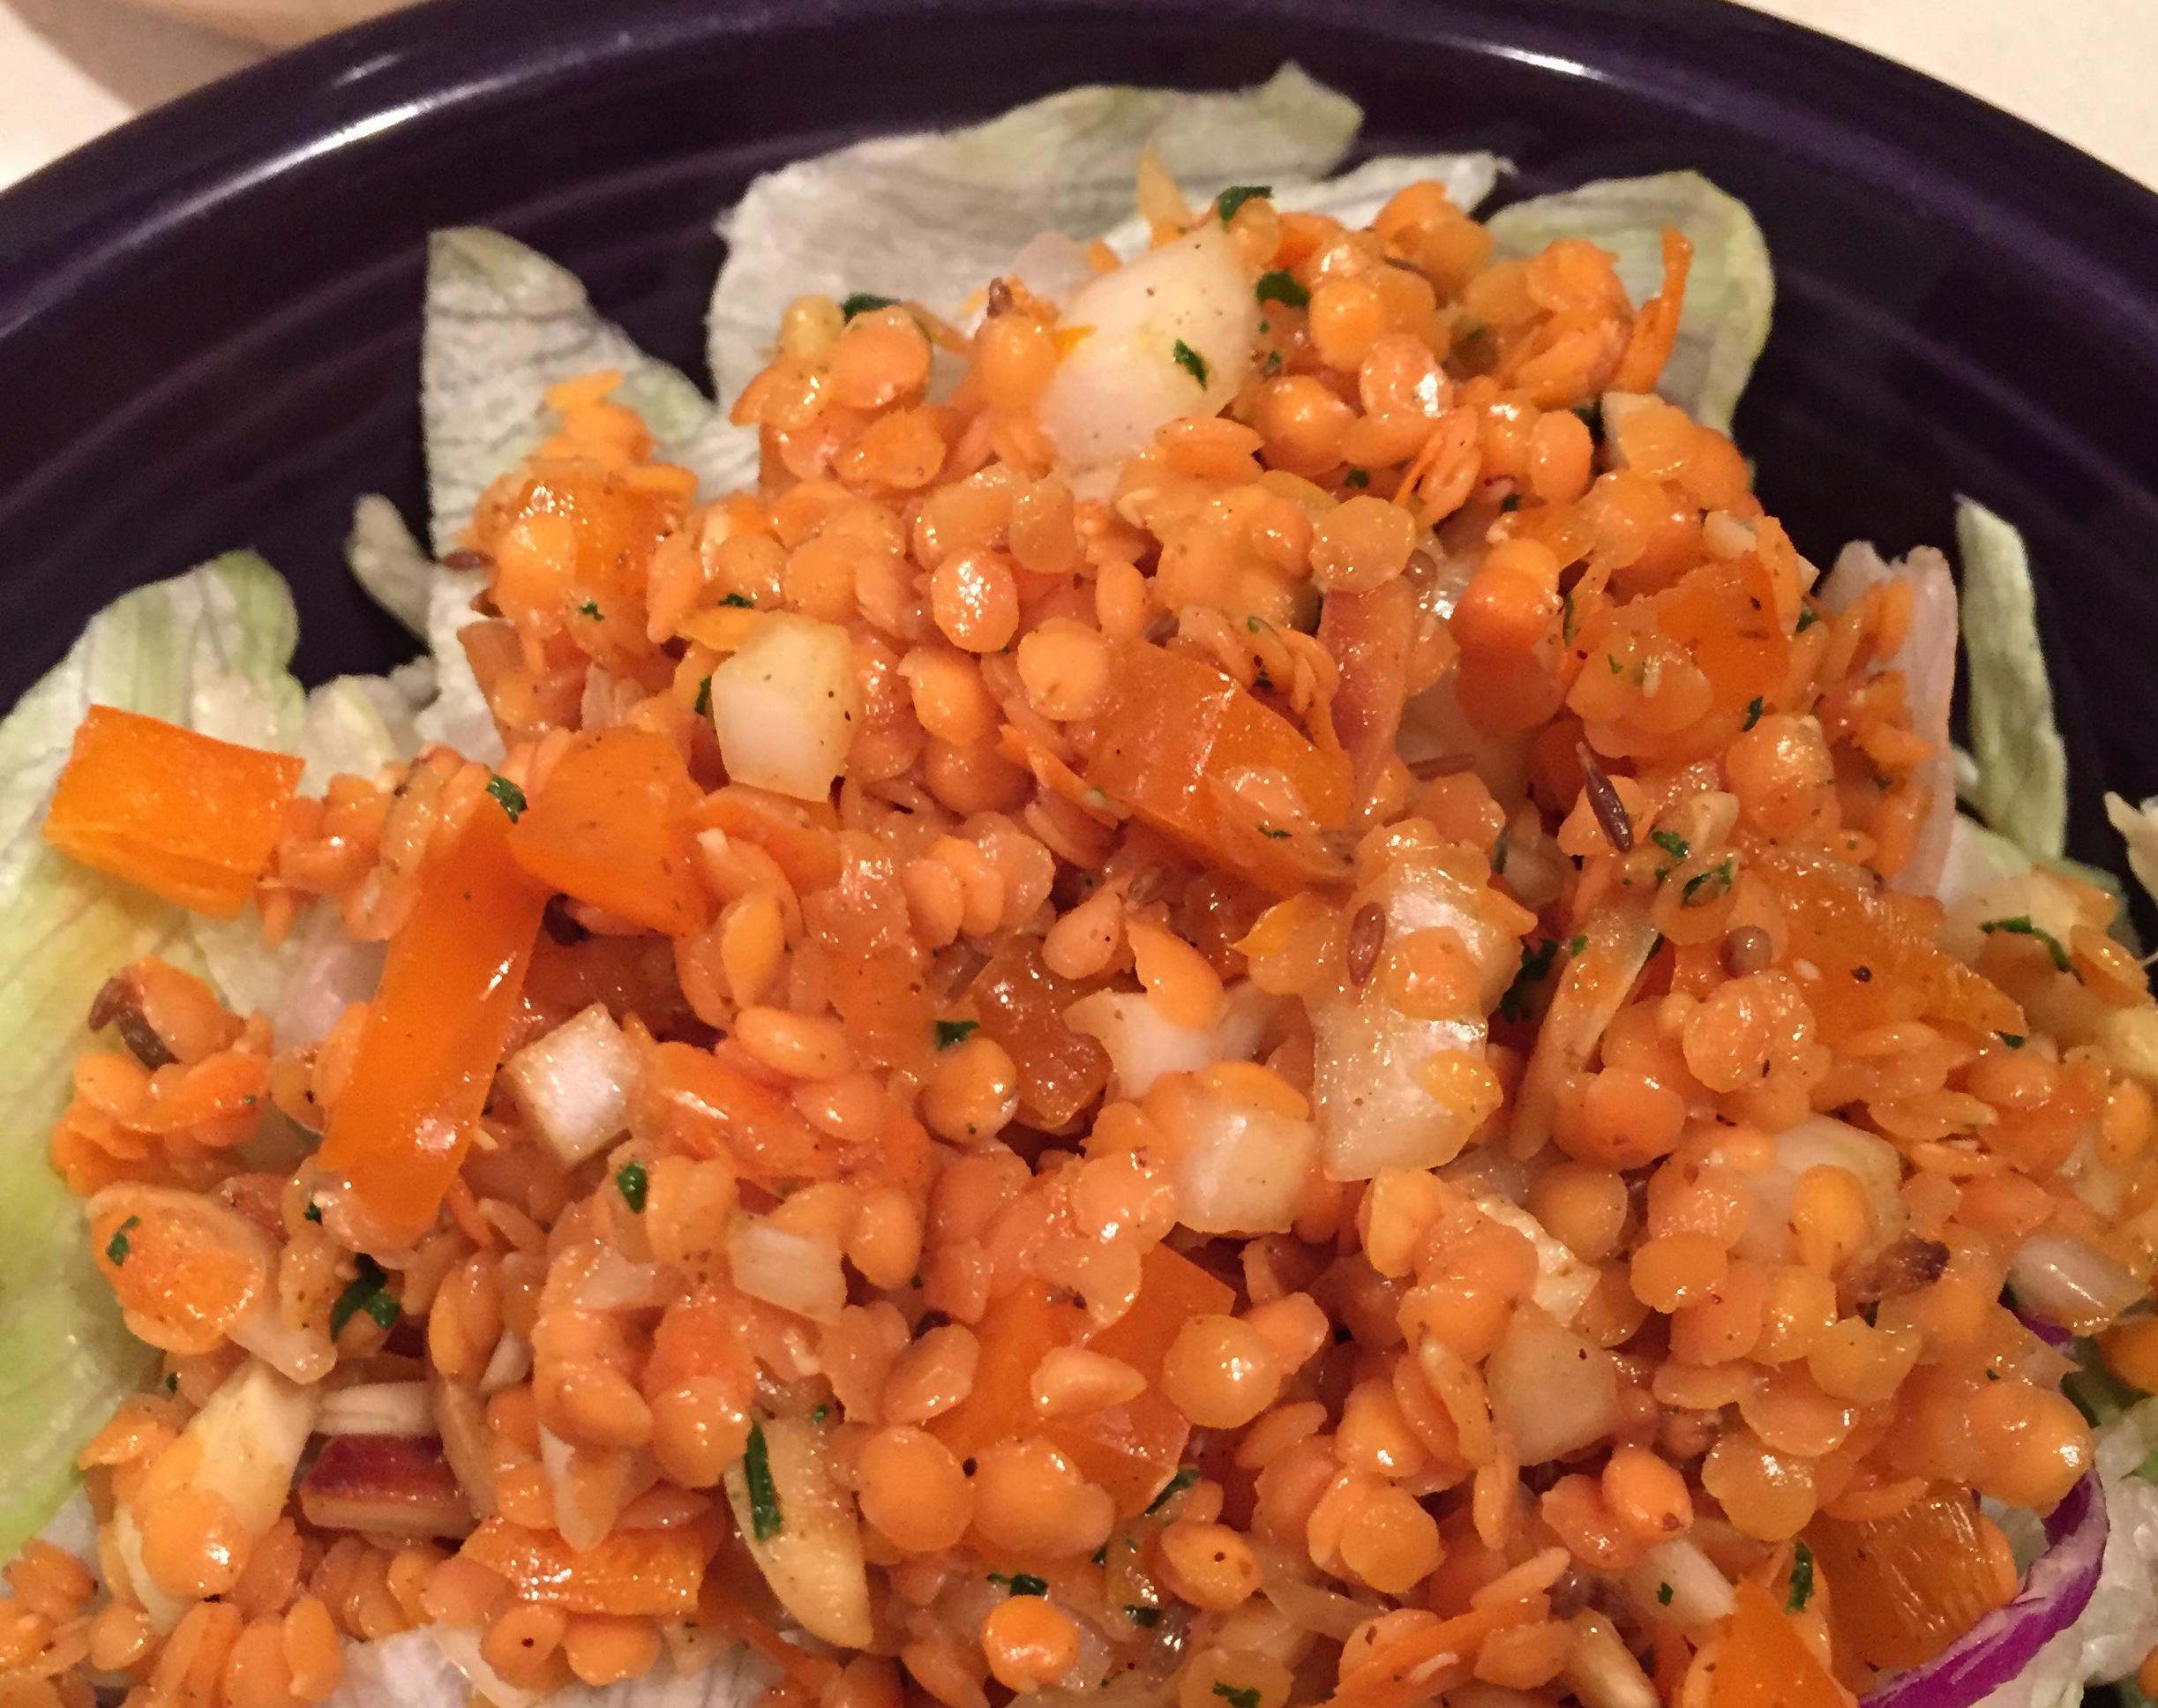 Delicious and Nutritious: Red Lentil Salad Recipe